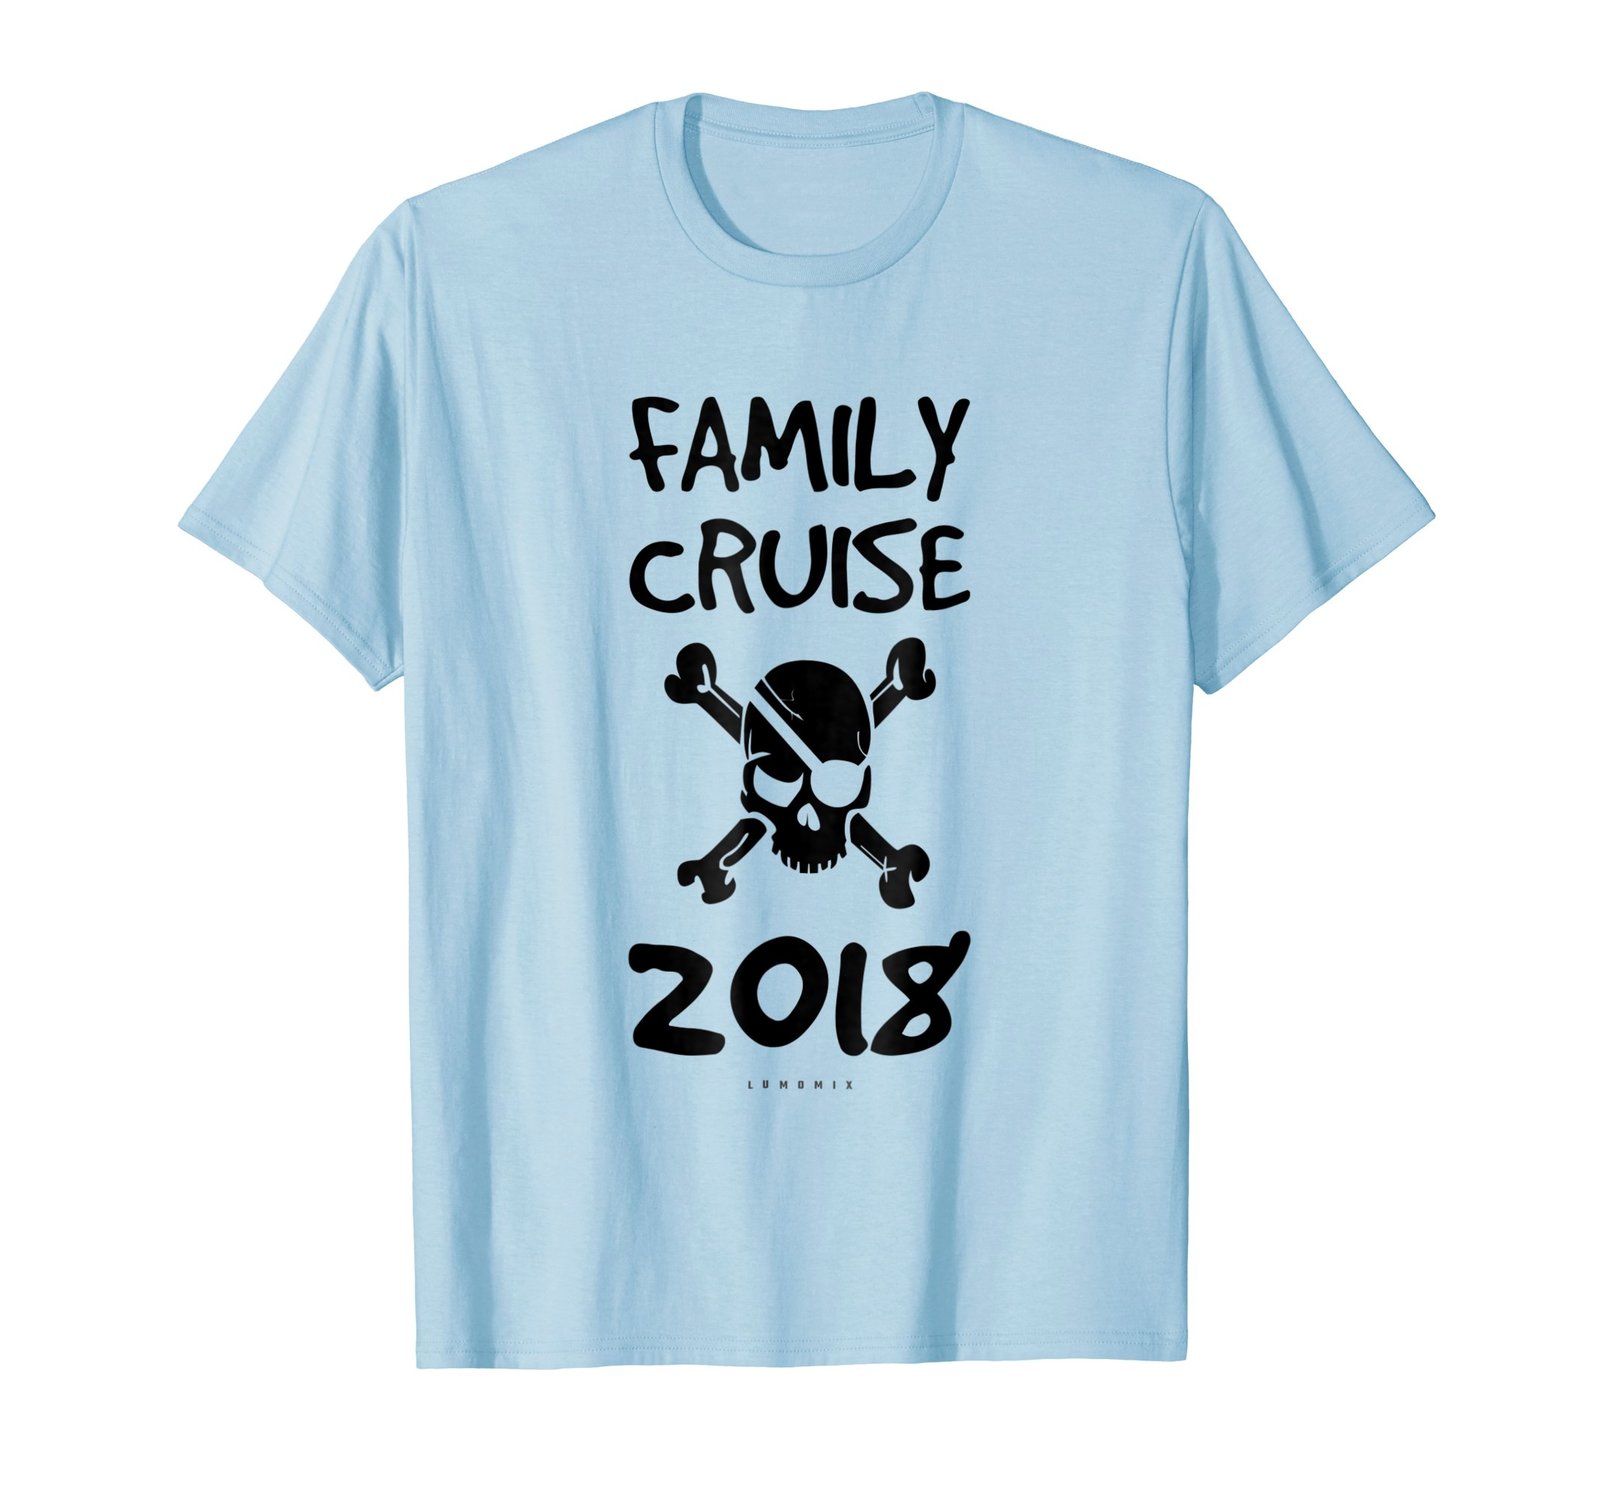 Funny Shirts - Family Cruise 2018 T Shirt - Funny Family Cruise Pirate ...